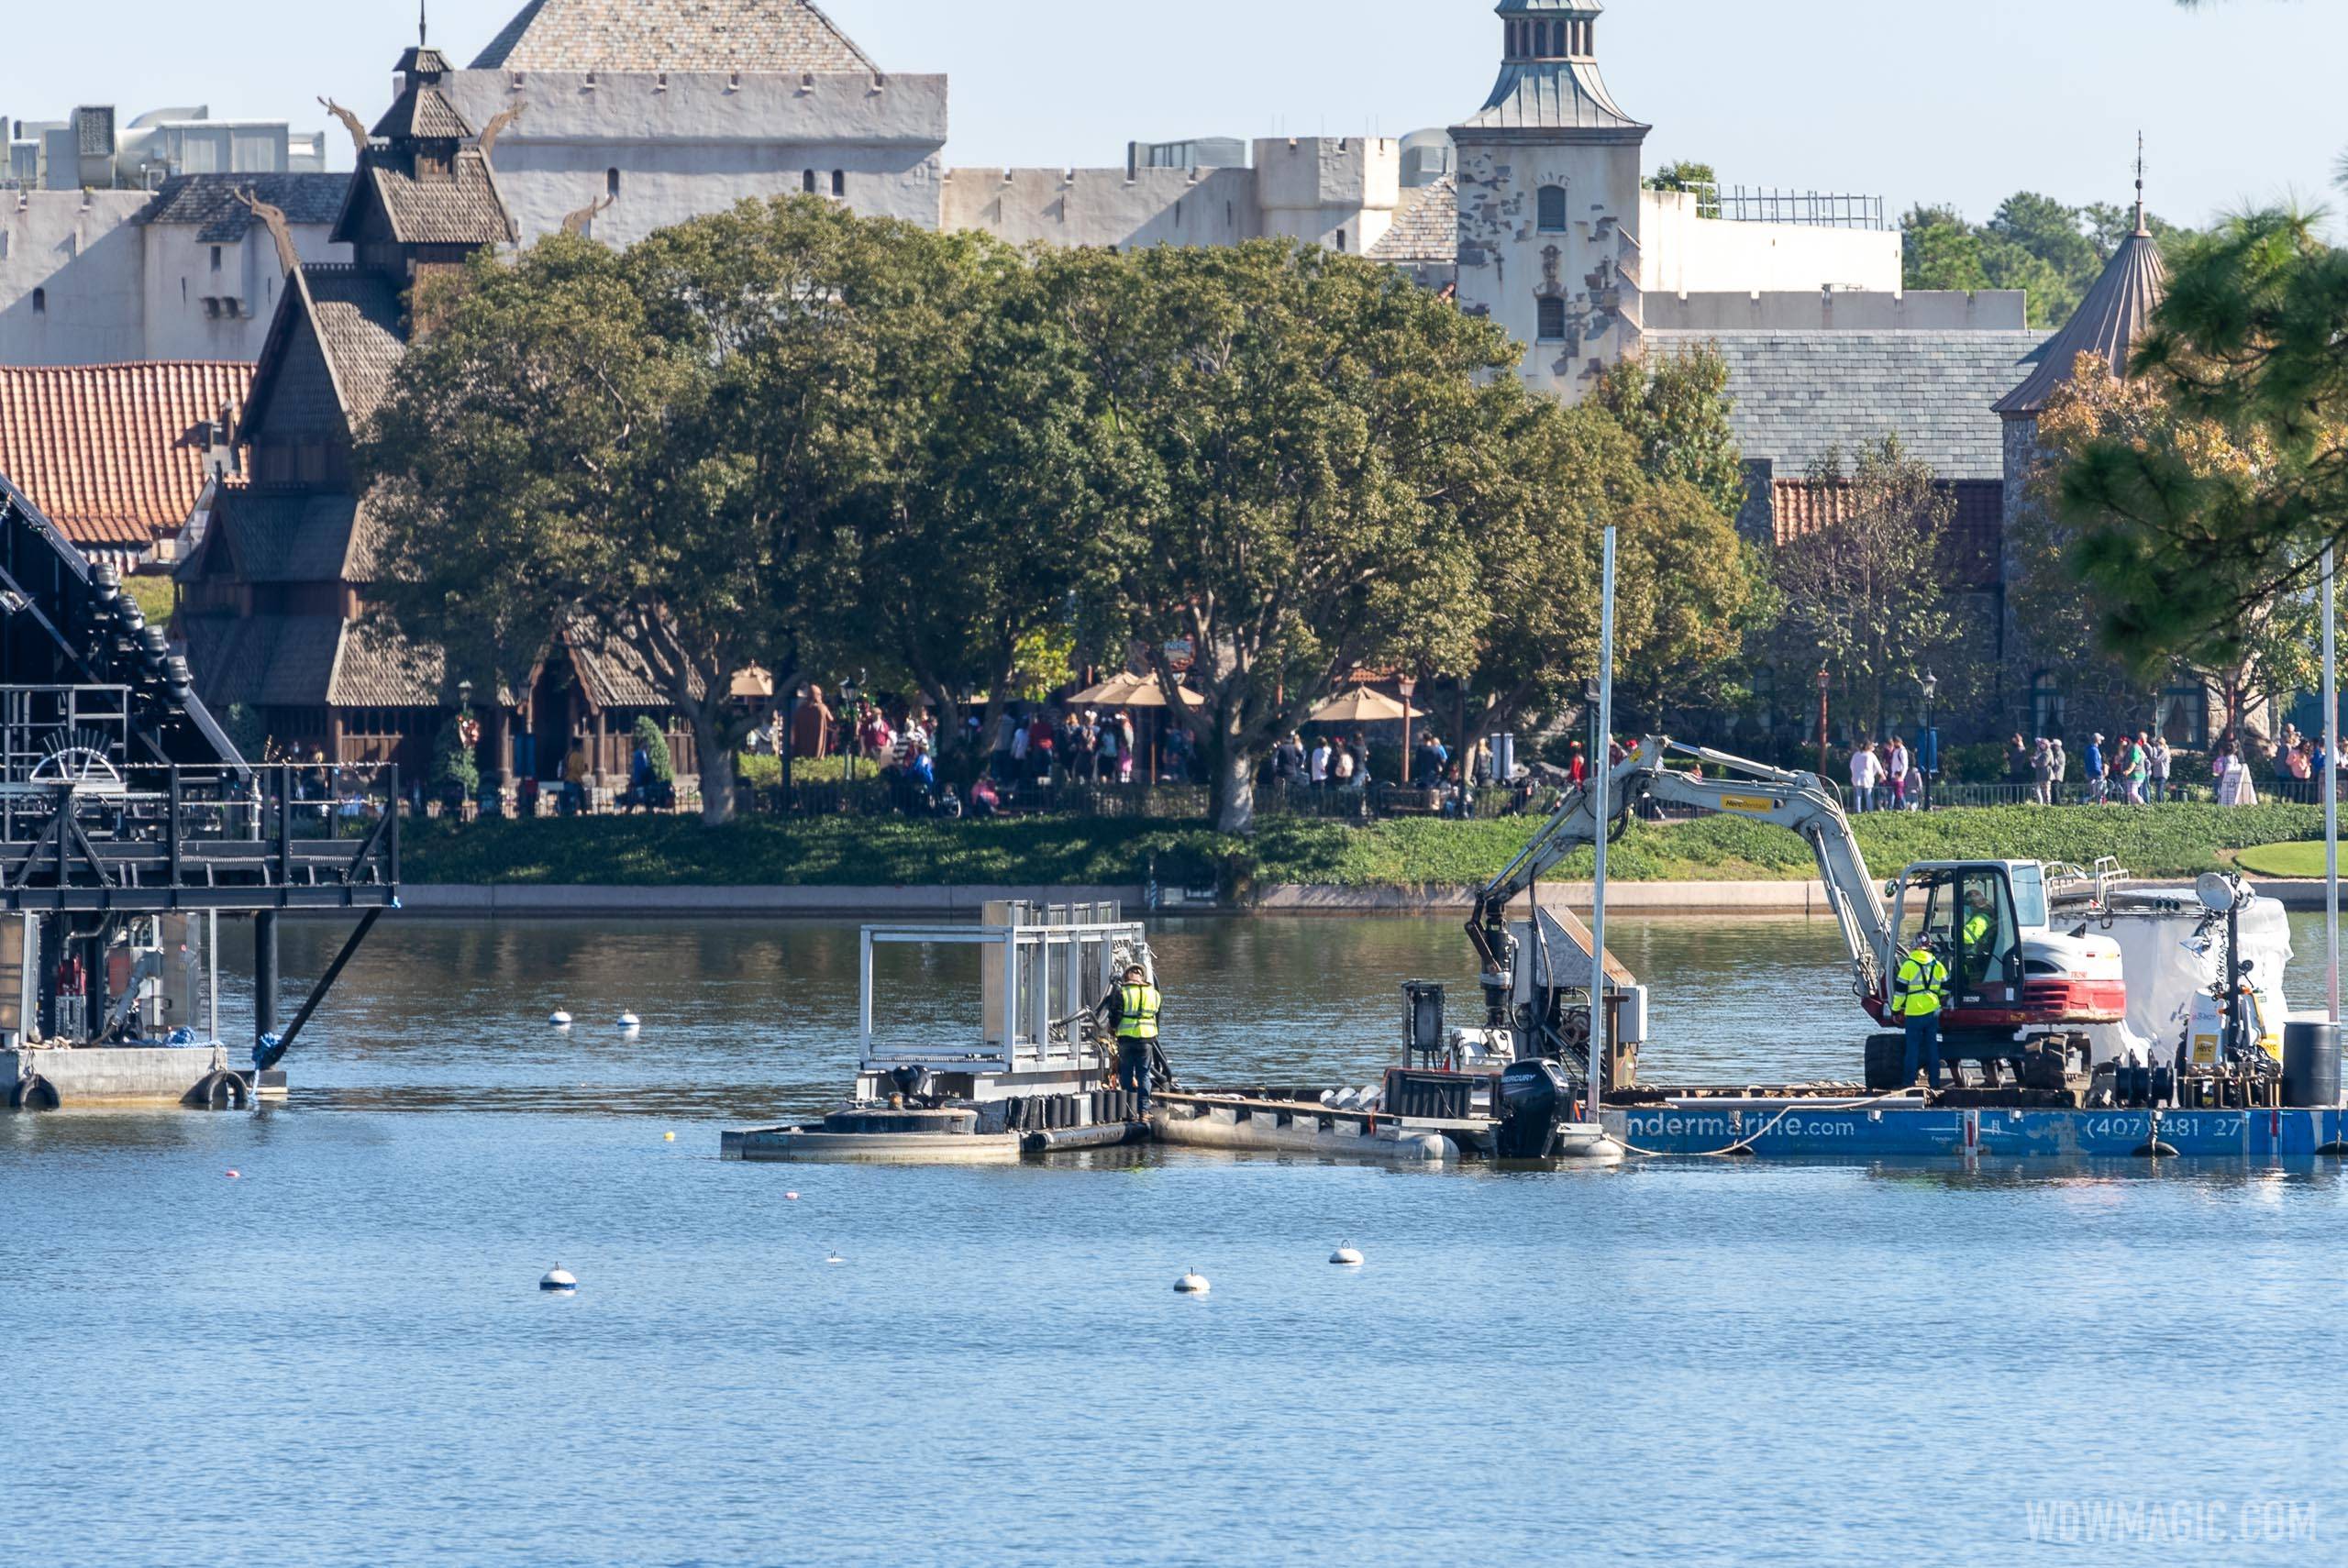 PHOTOS - Electrical work continues in World Showcase Lagoon for Harmonious show barges